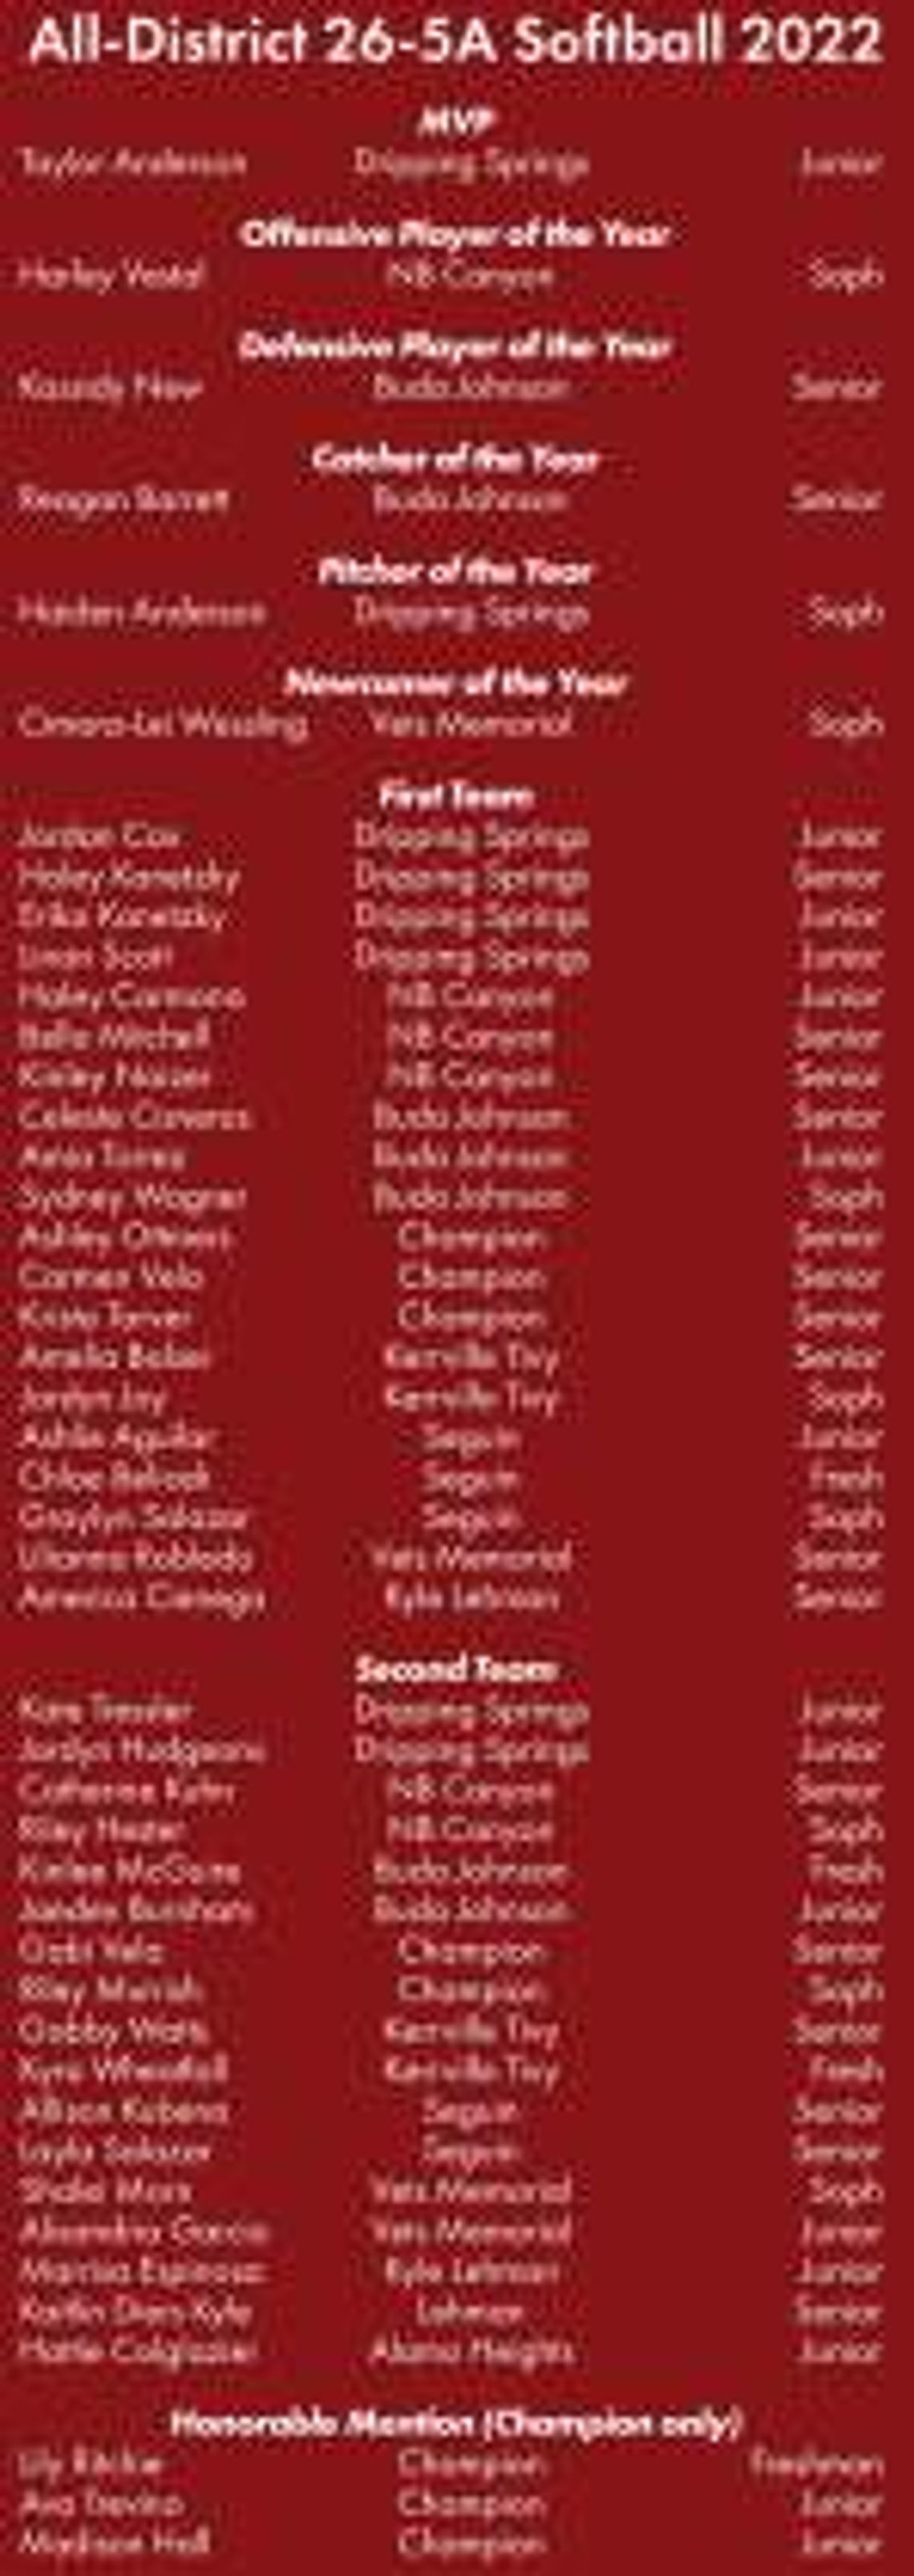 Chargers have 8 softball players named all-district